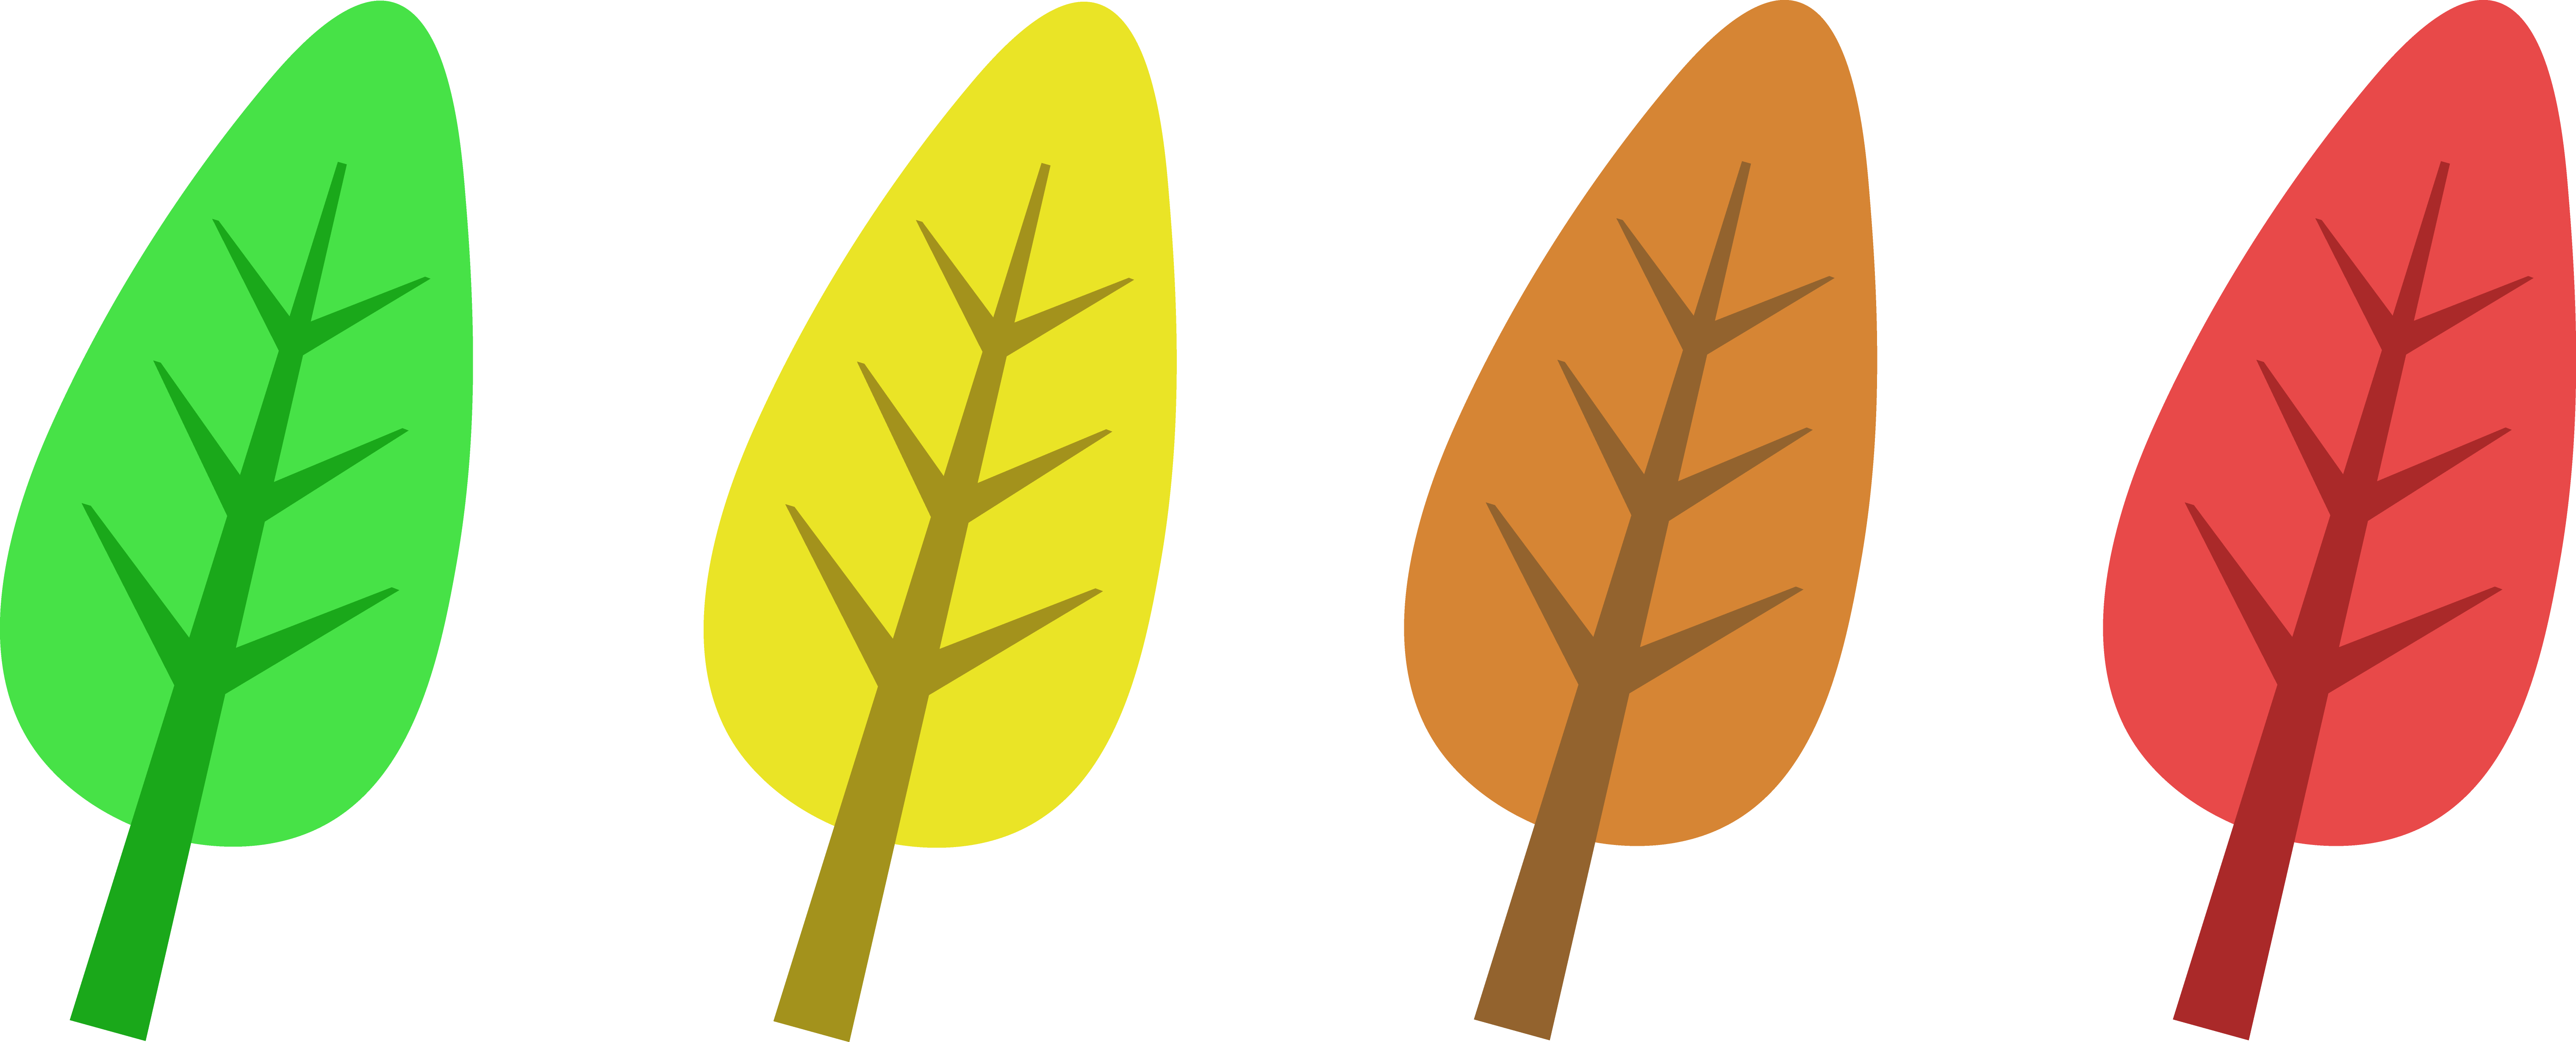 Leaf free leaves clipart free clipart graphics images and photos 2